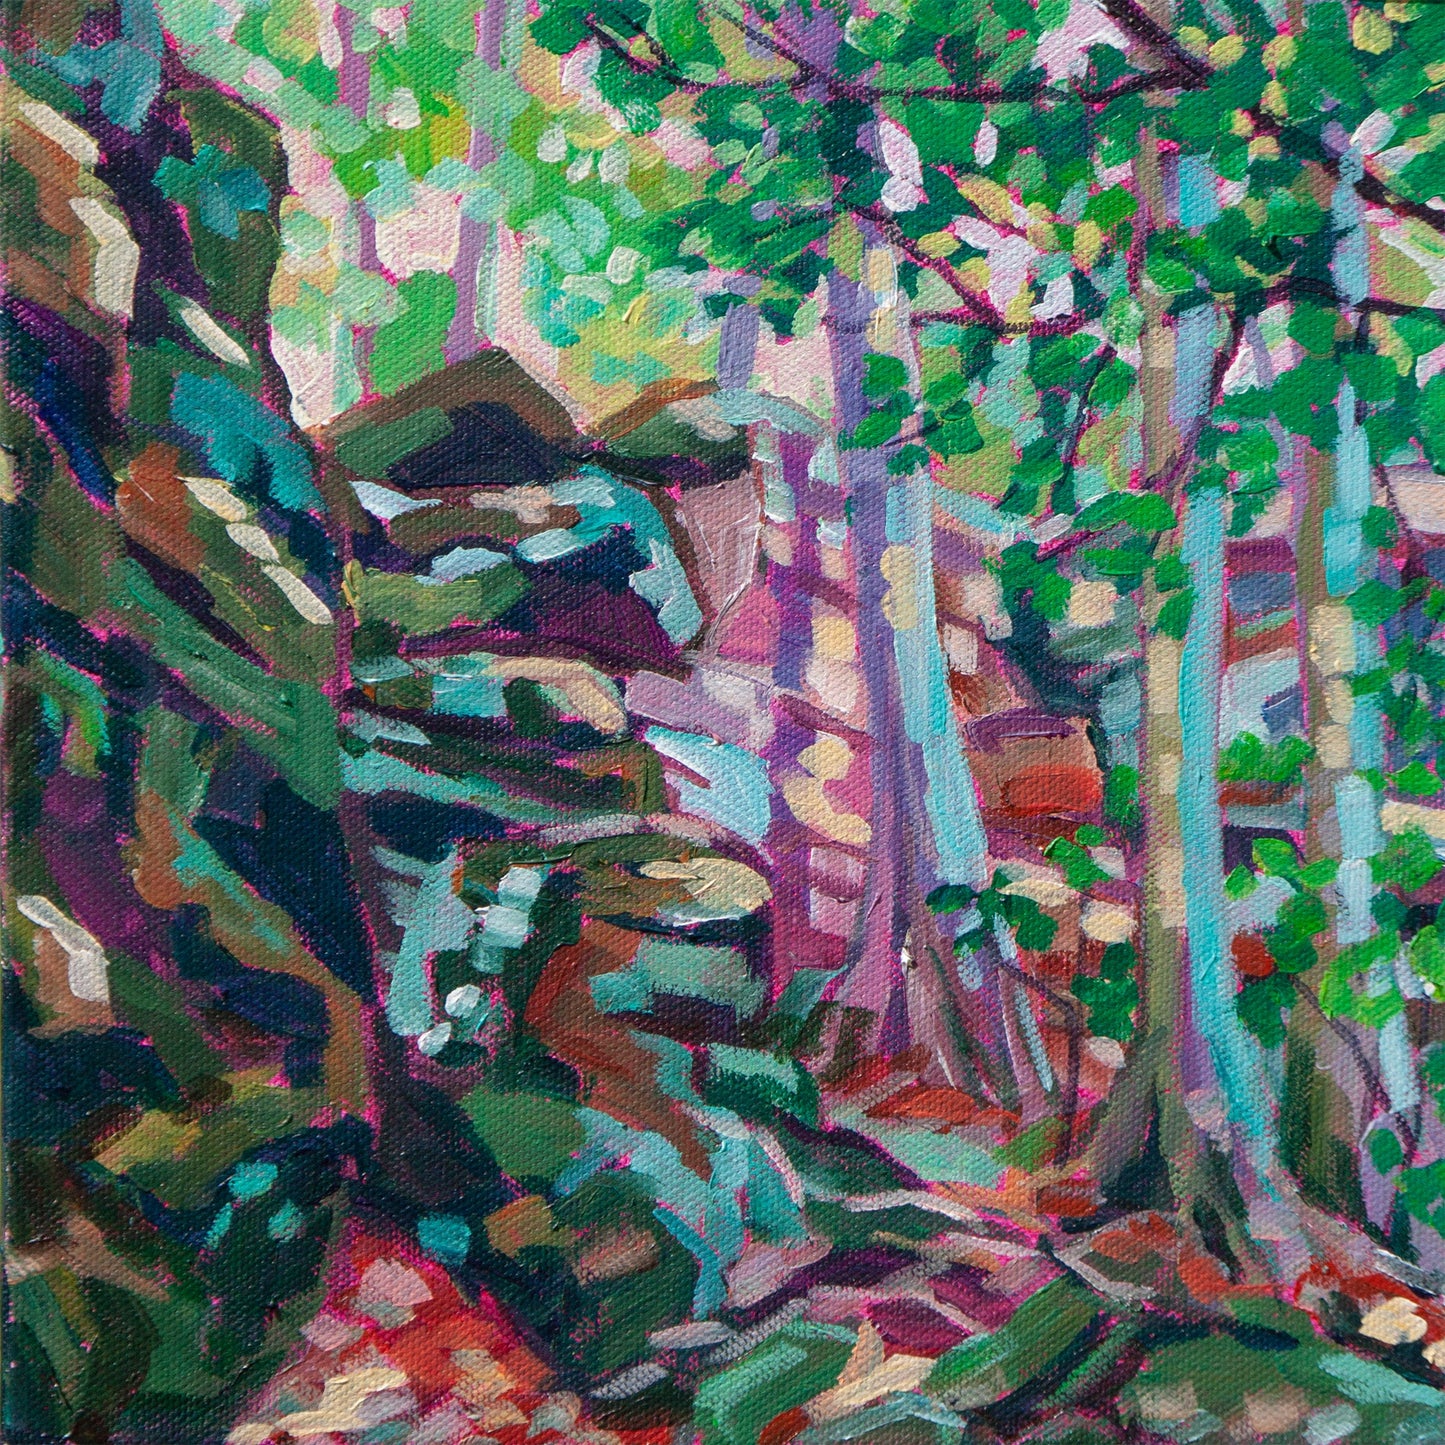 magical painting of ledges area of forest hike in Cuyahoga National Park south of Cleveland Ohio